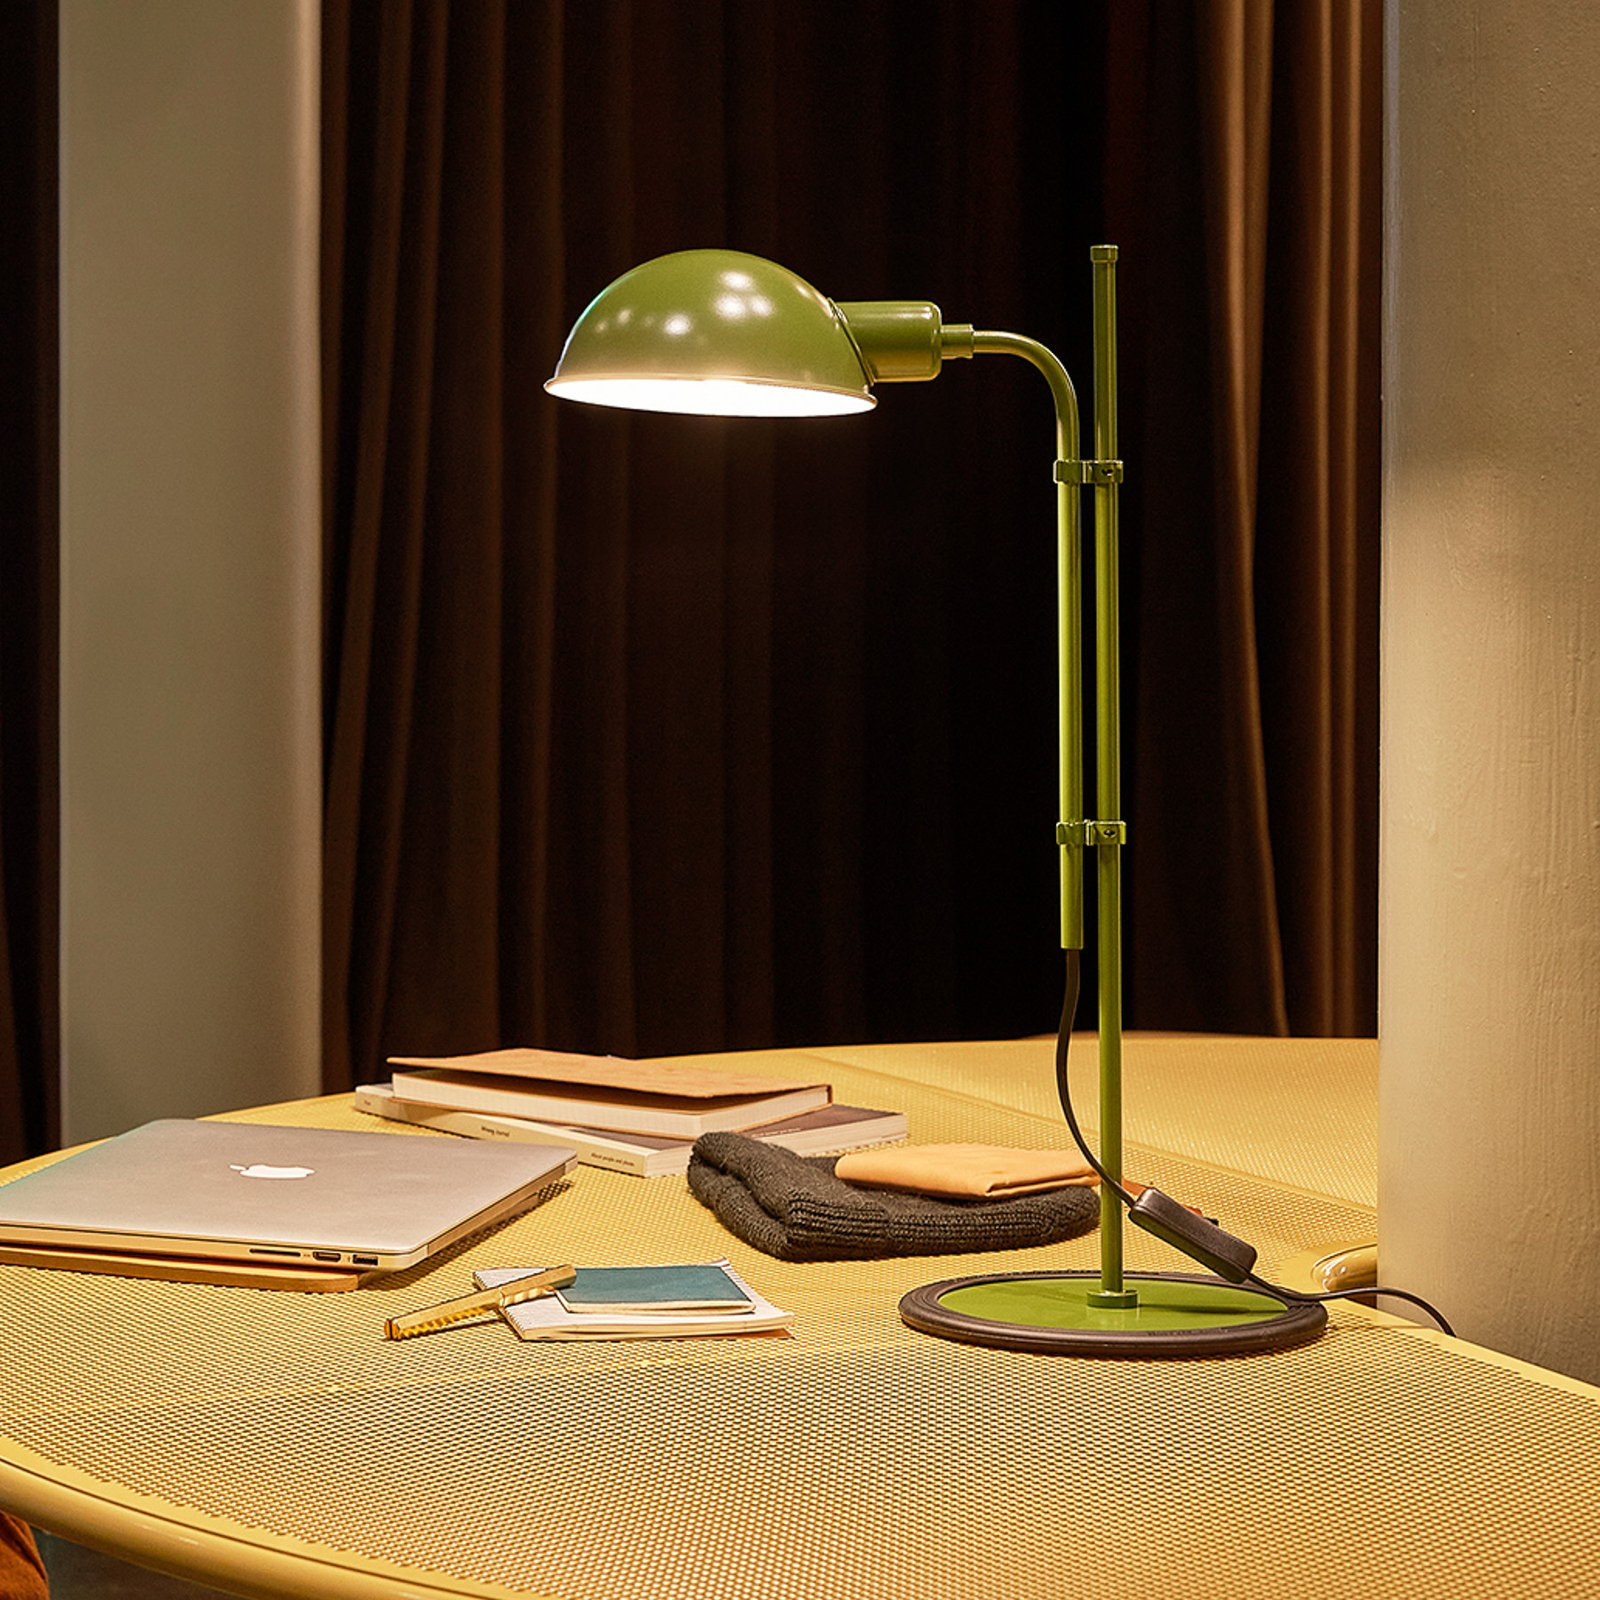 MARSET Funiculí table lamp, green